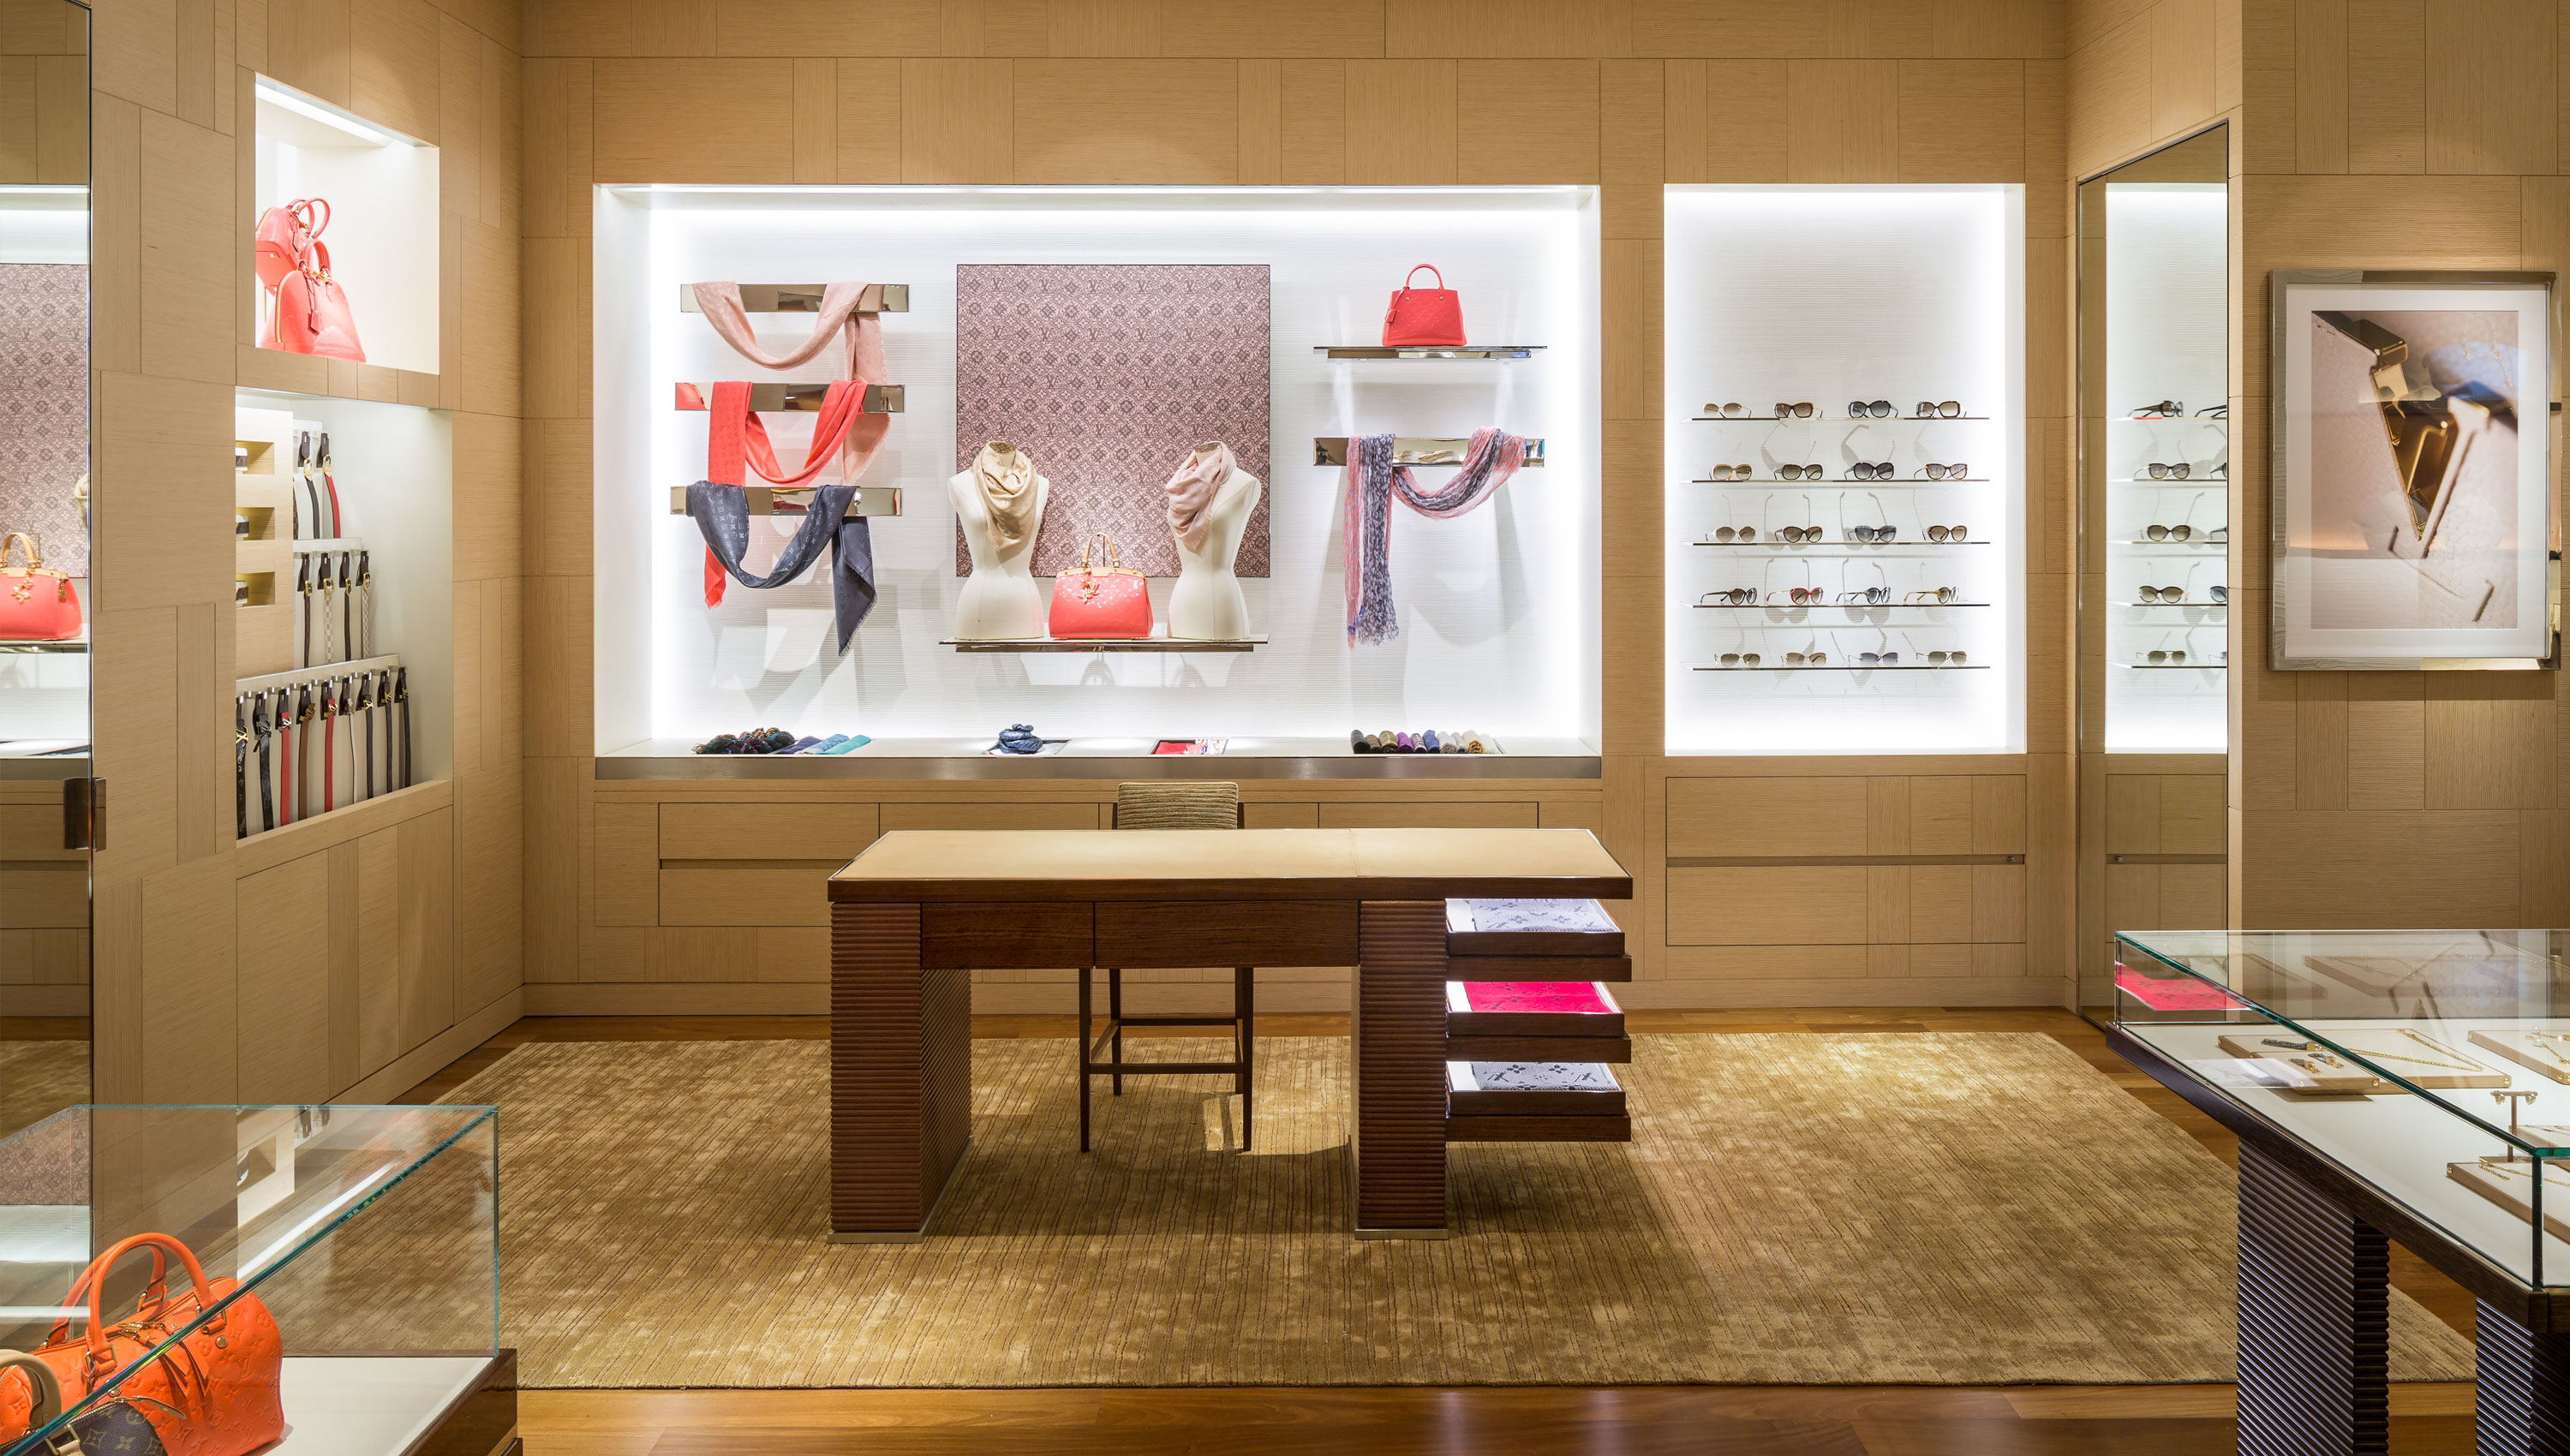 Louis Vuitton Cleveland Saks in Beachwood, OH | Whitepages